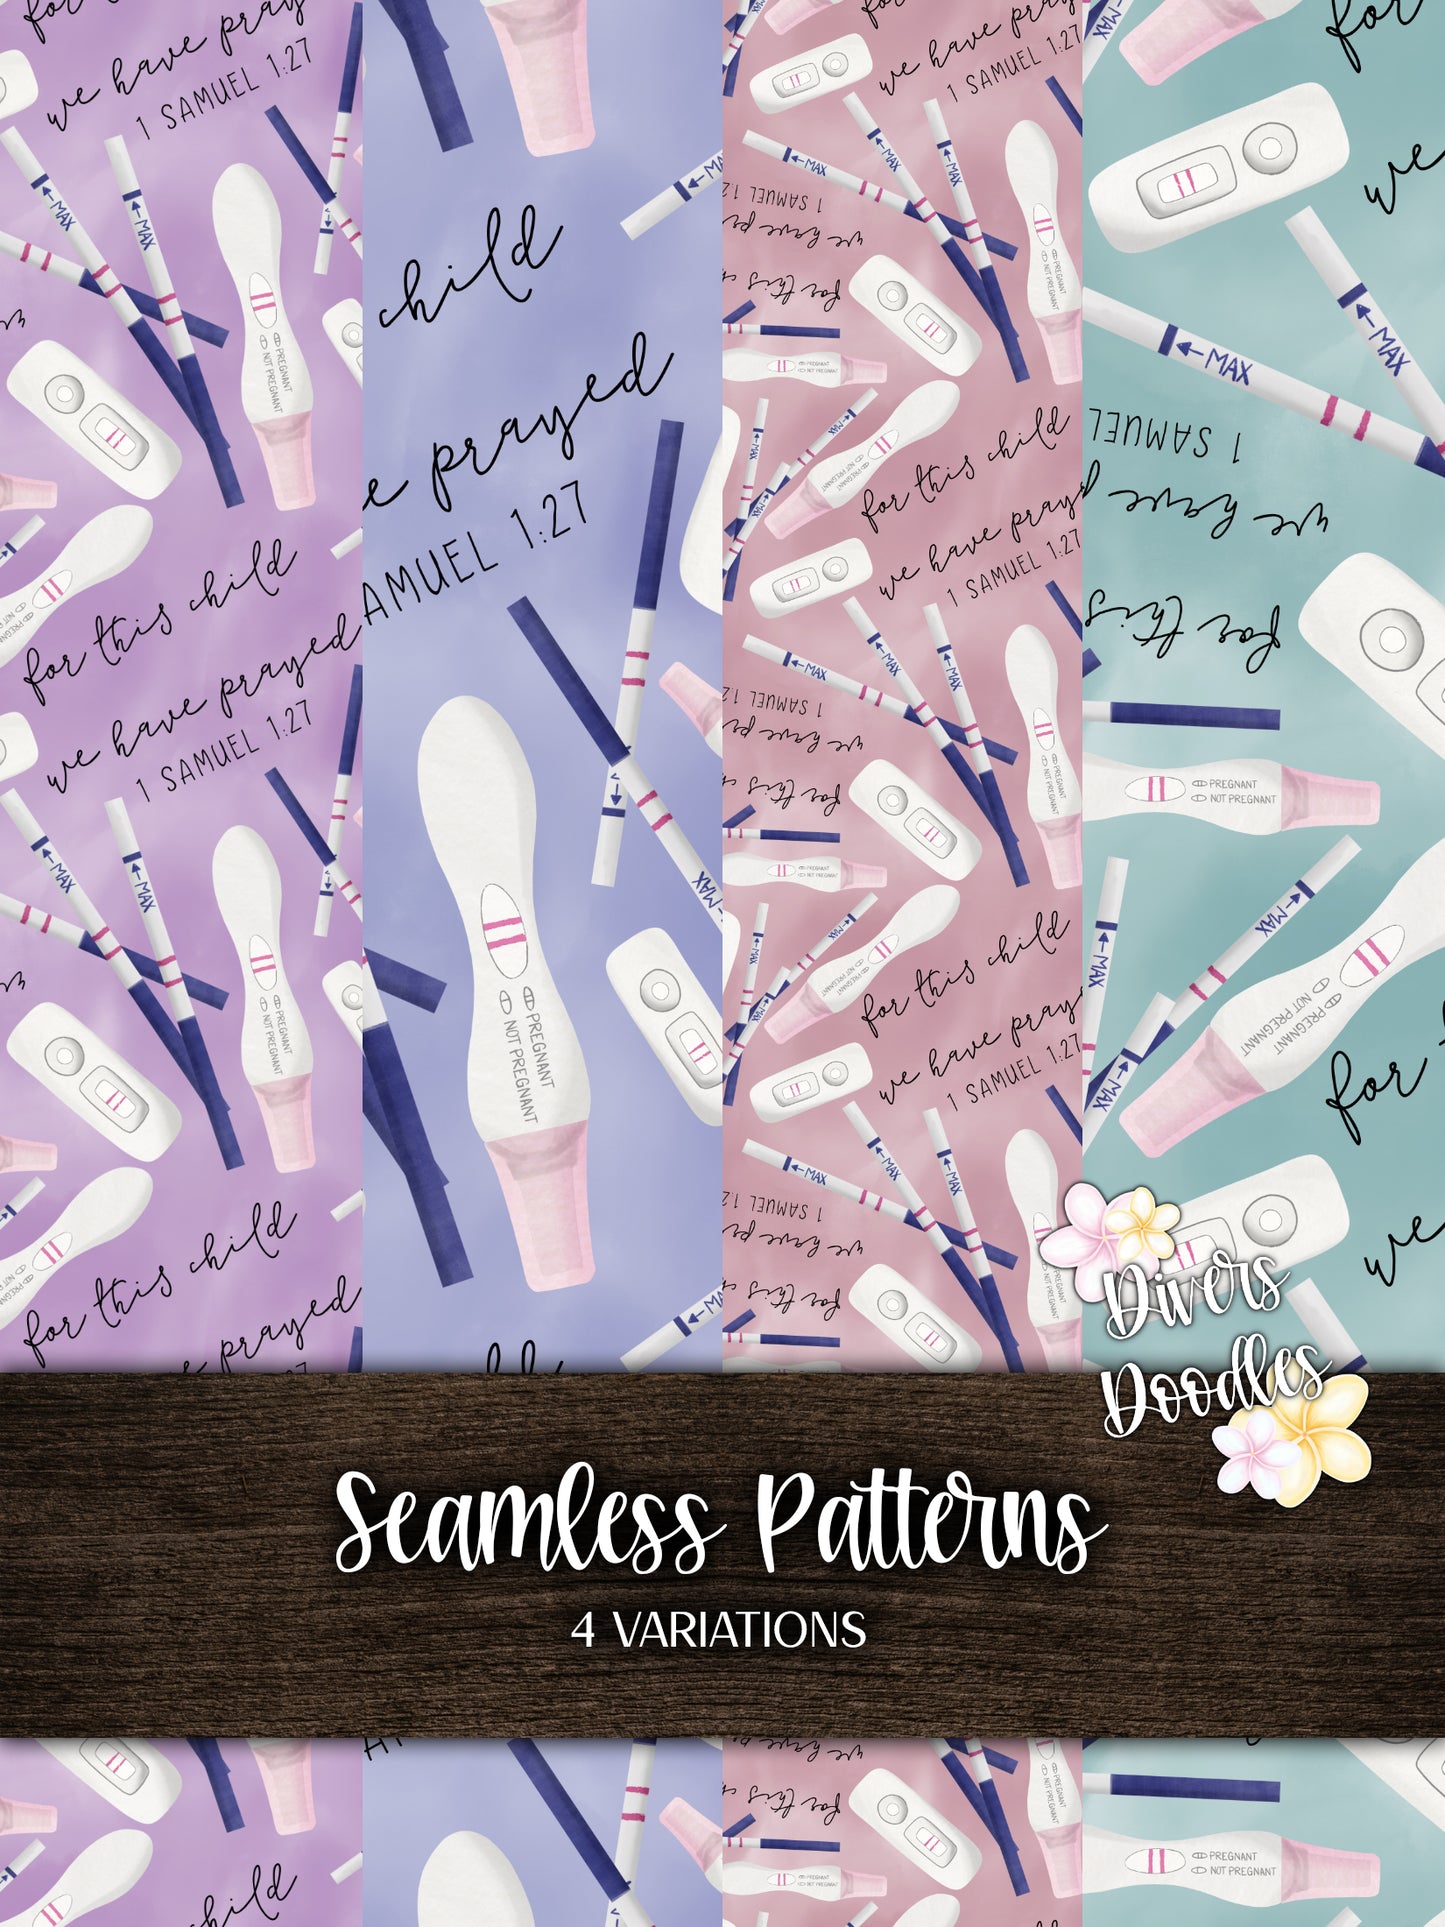 Pregnancy Announcement Seamless Patterns, Hand Drawn Digital Paper Pack for Commercial Use, Baby Scrapbook Paper, Baby Shower Invitation